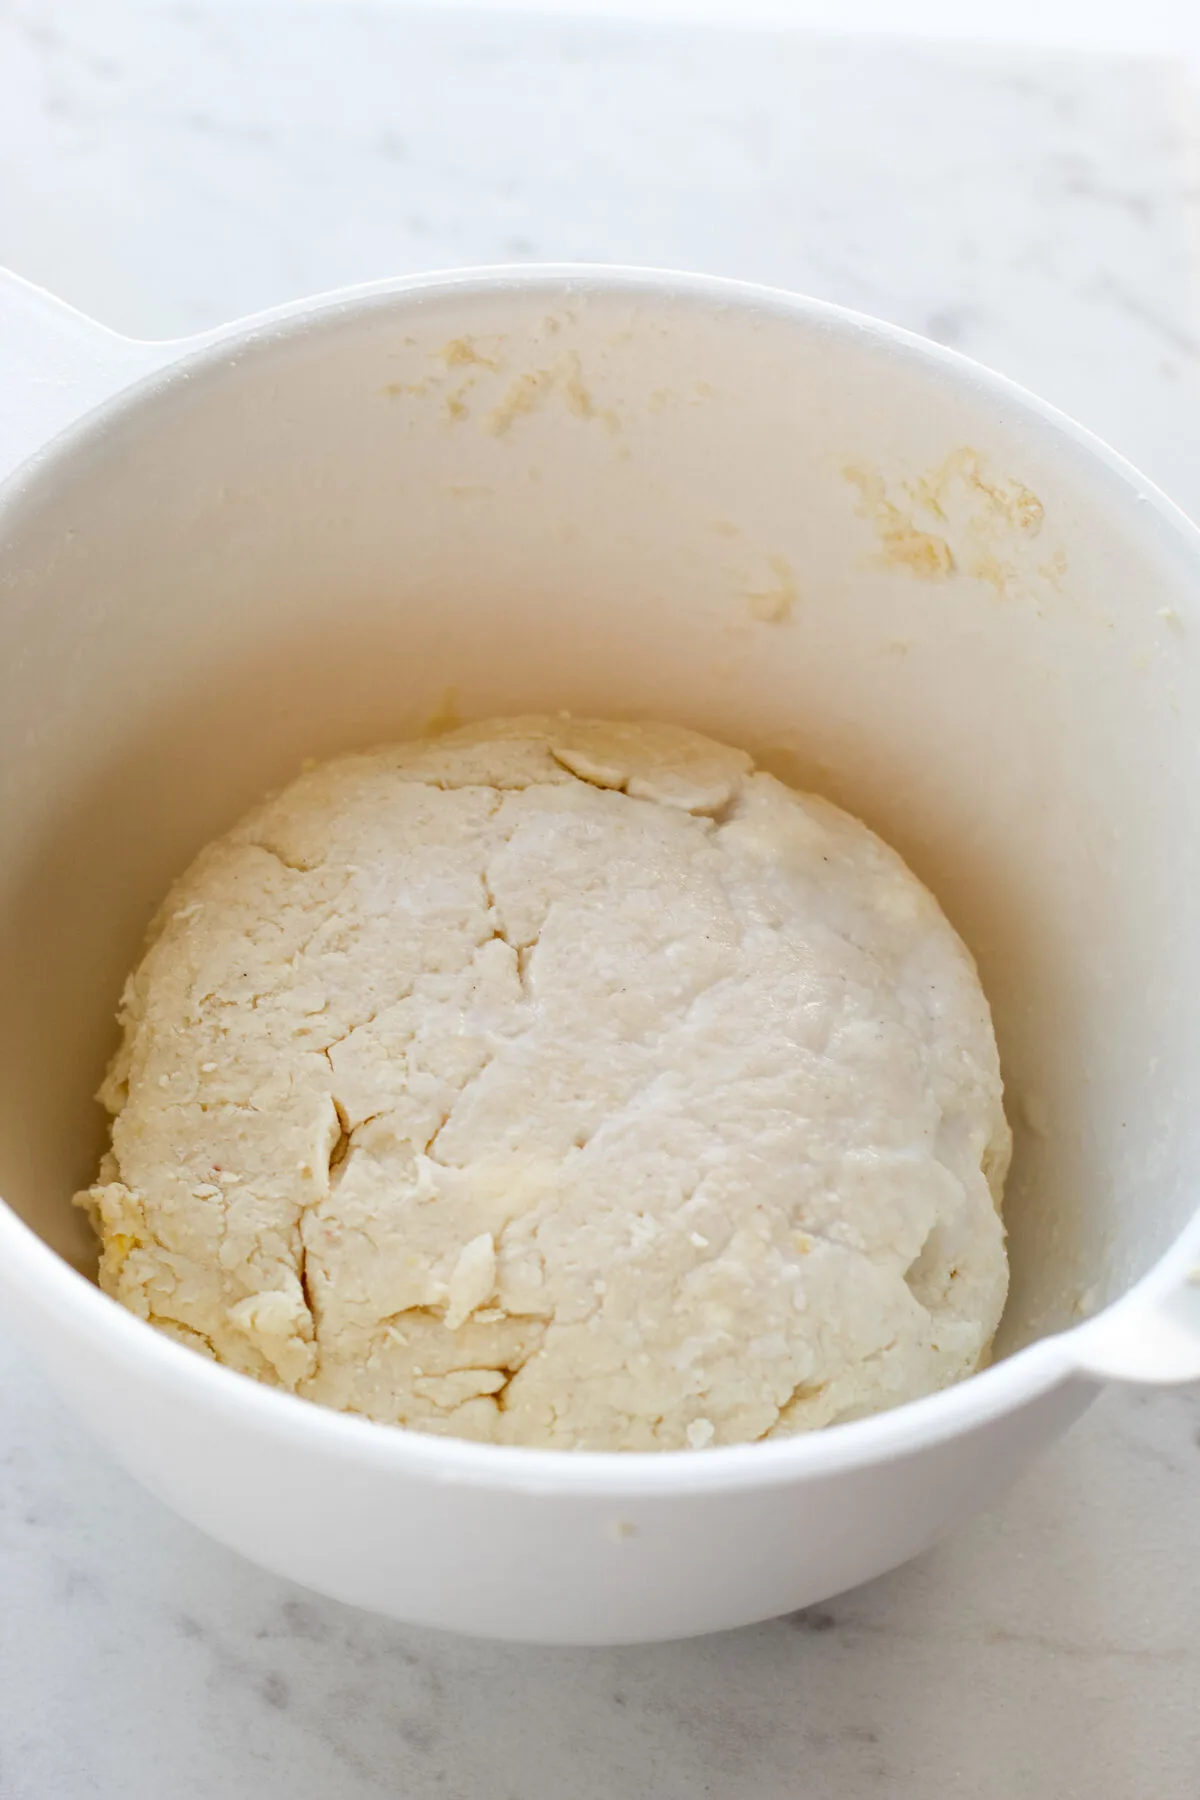 Dough worked into a bowl.